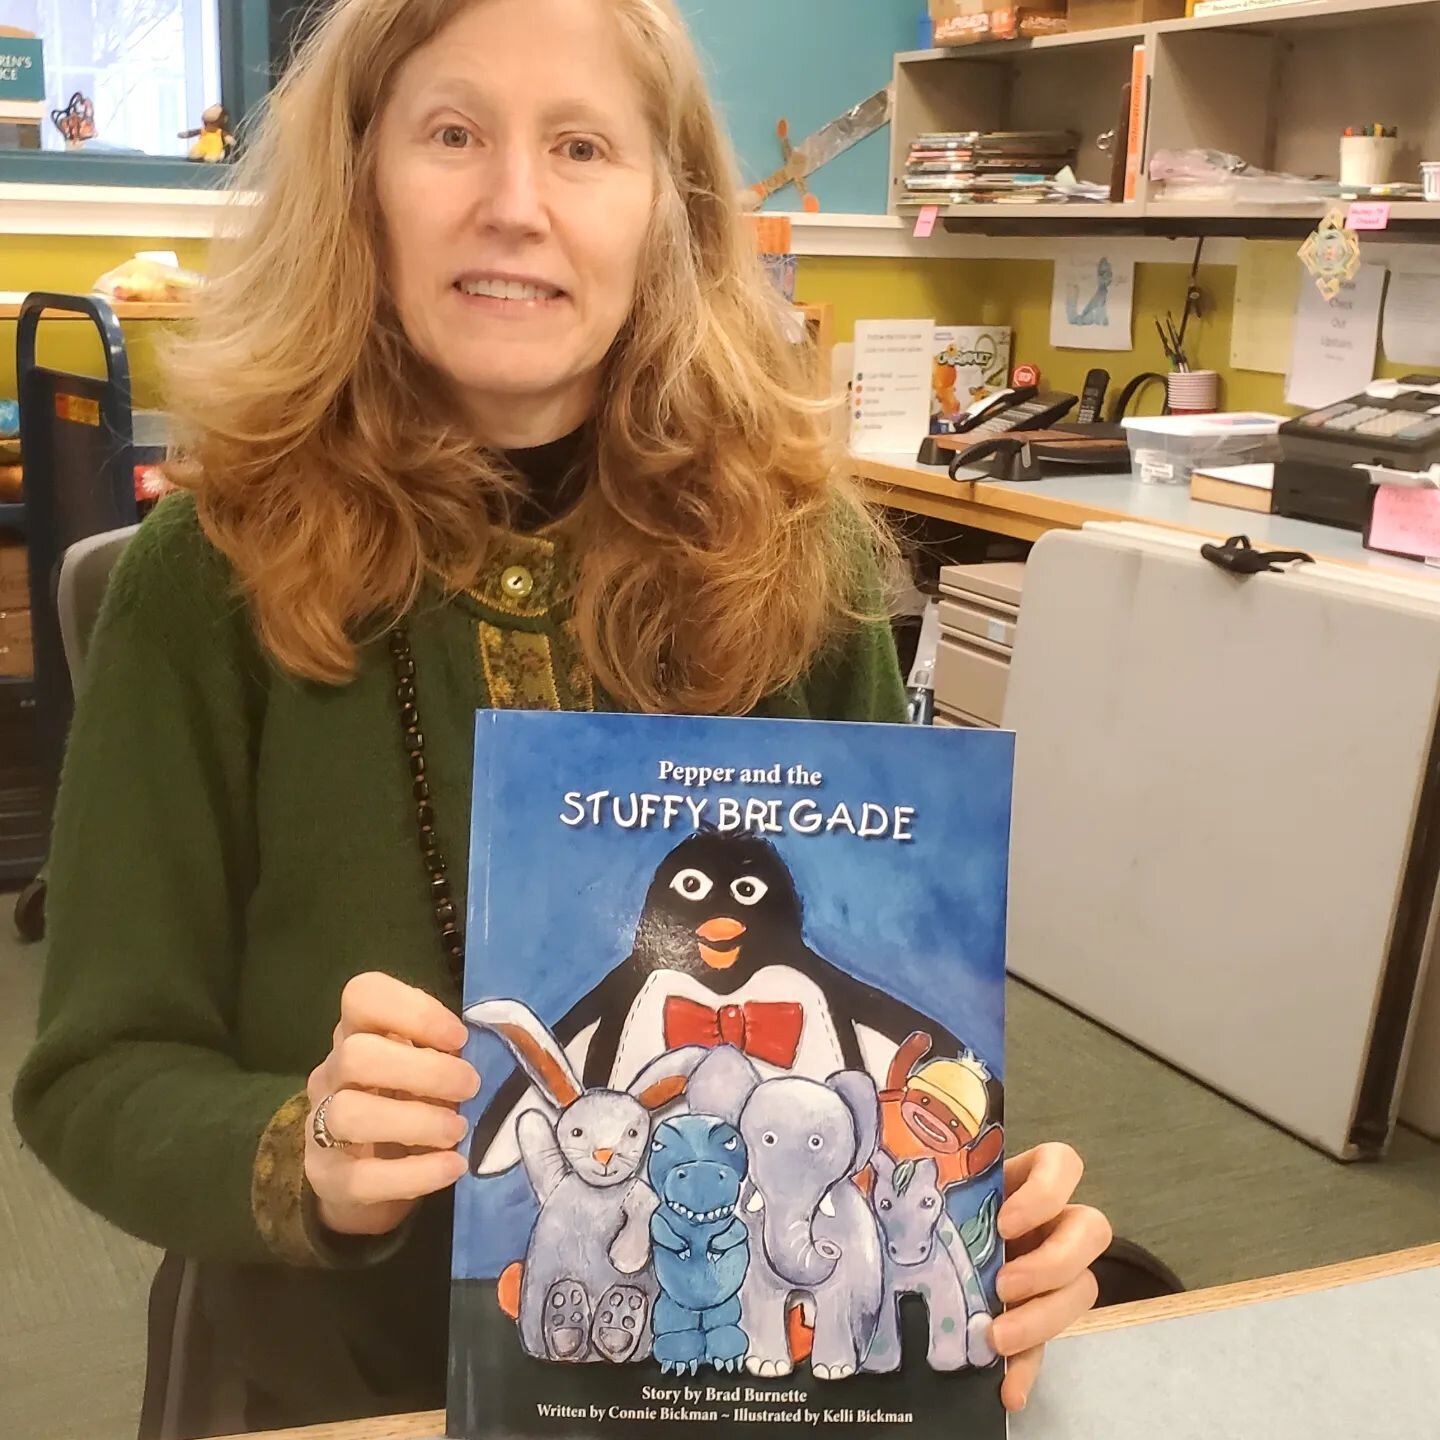 Donated a copy of 'The Stuffy Brigade' to our local library! Here is our wonderful librarian showing it off... Story by Brad Burnette, written by Connie Bickman and illustrated by me. 

You can get your own copy here: Pepper and the Stuffy Brigade ht